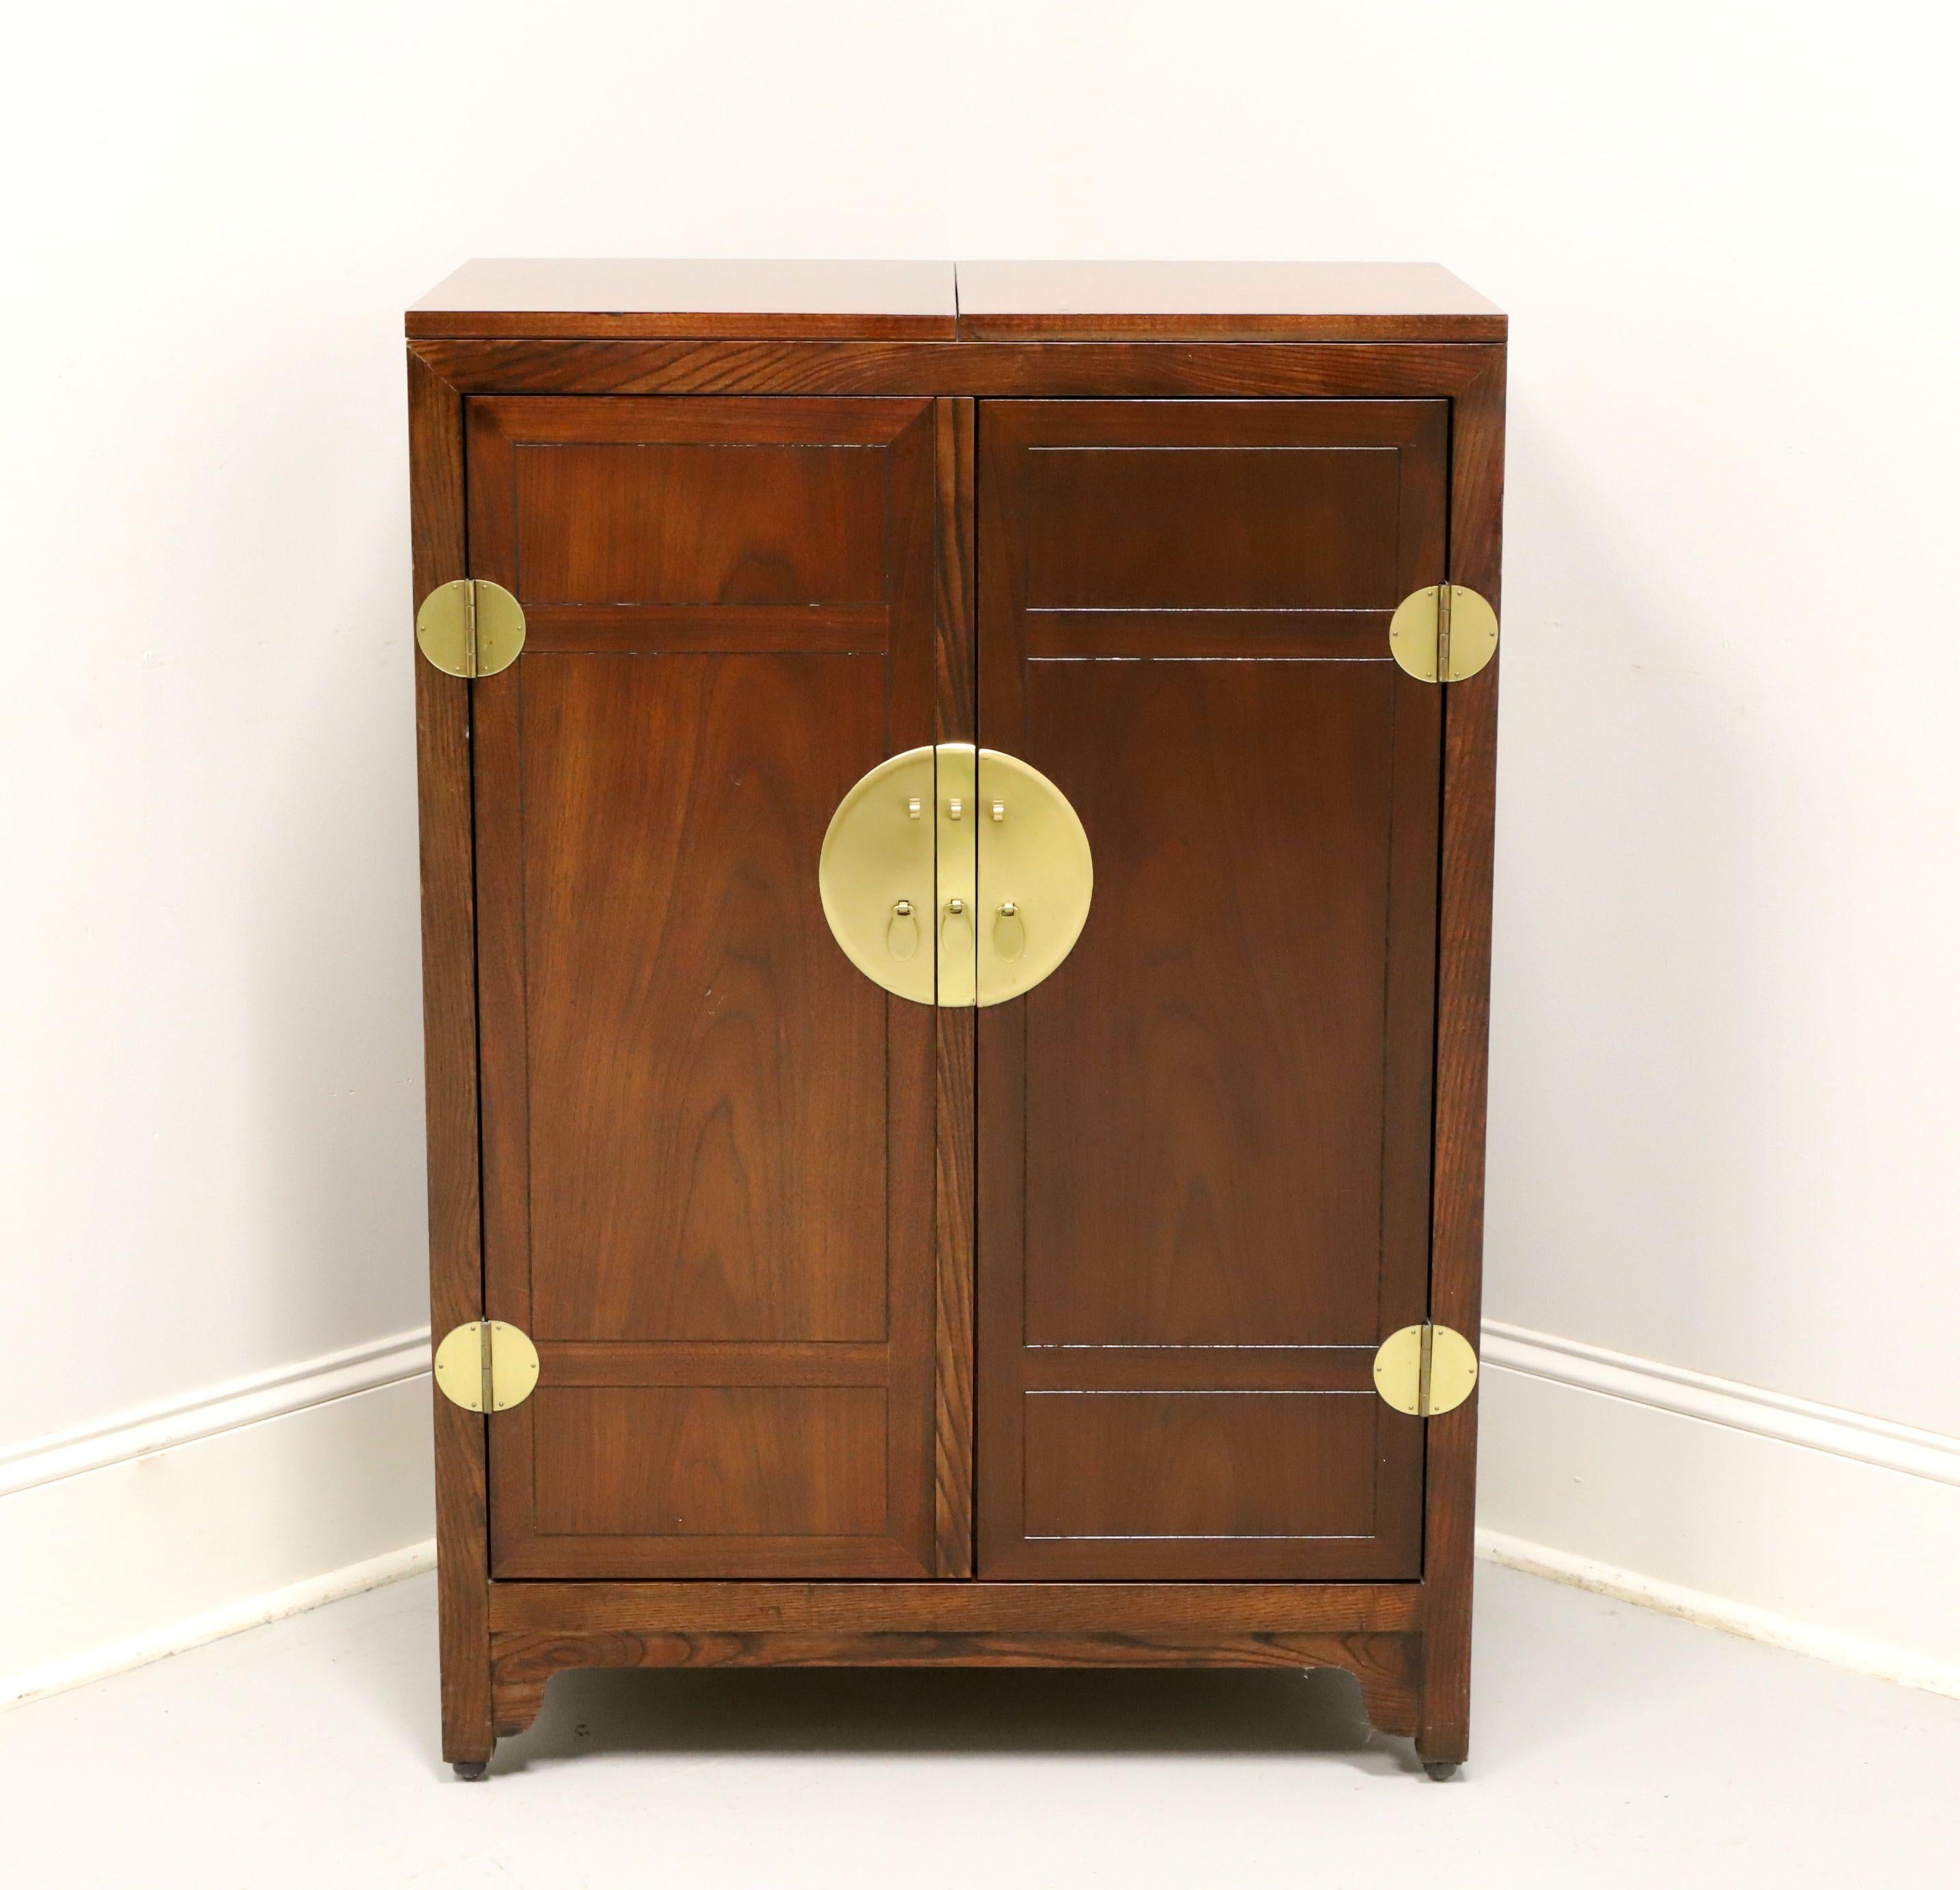 An Asian inspired bar cabinet by Baker Furniture. Walnut, laminate surface under the flip out top, pull out wood supports for flip out top, decorative brass hardware & accents, and bracket feet with casters. Features two doors revealing one upper